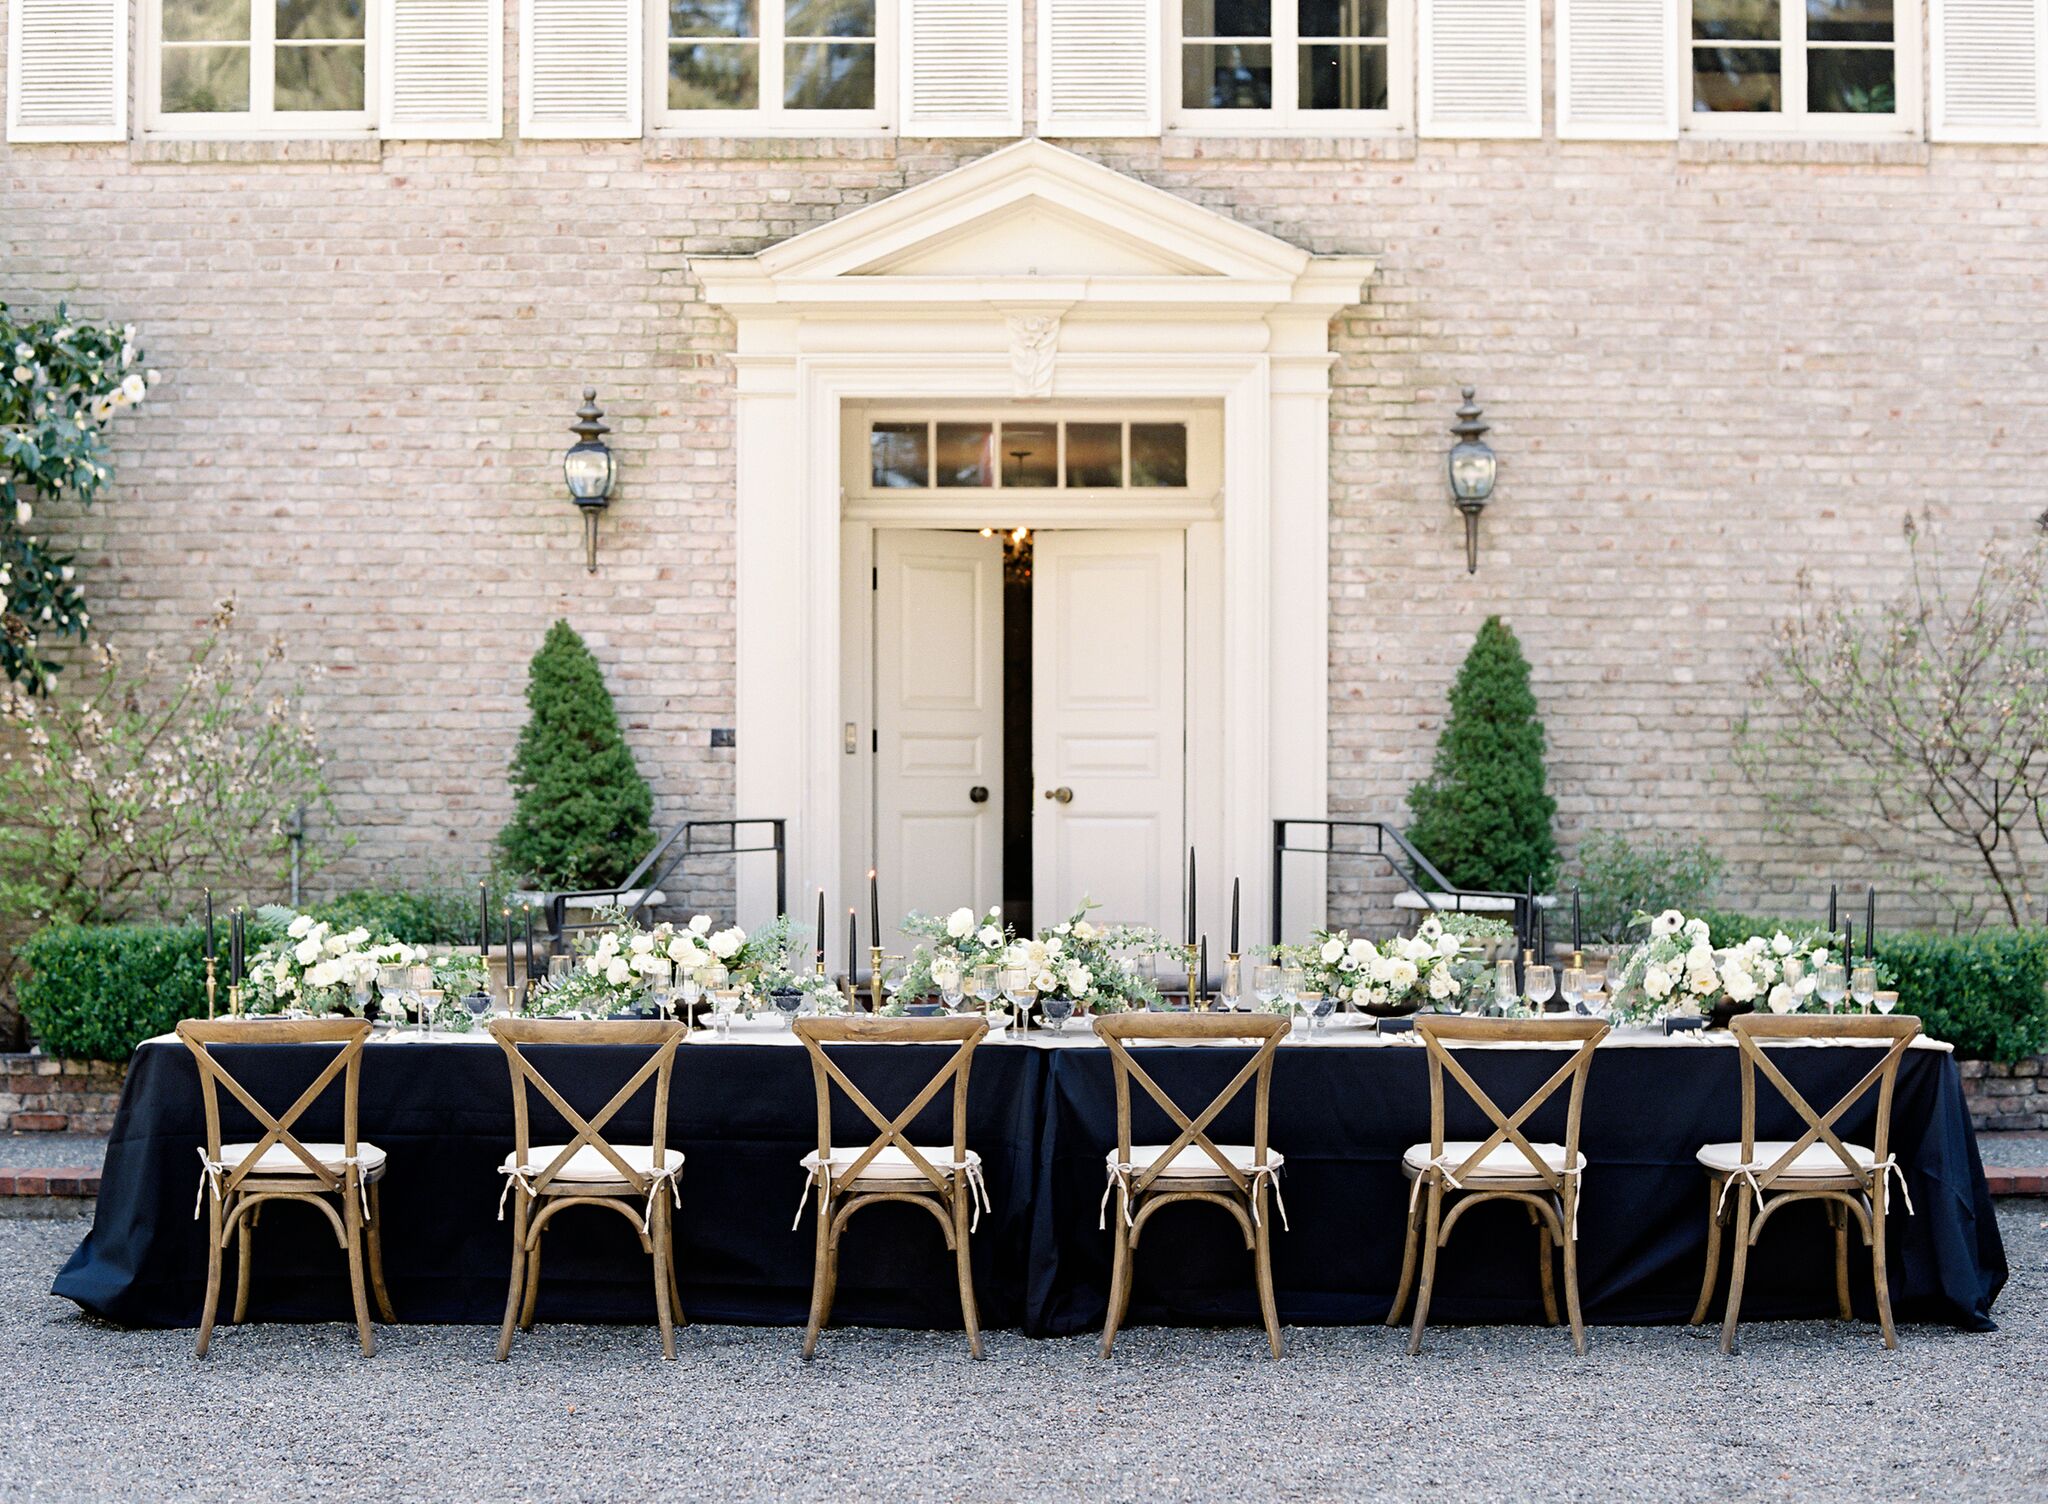 Kelly Strong Events: Top 5 to Consider When Selecting a Venue